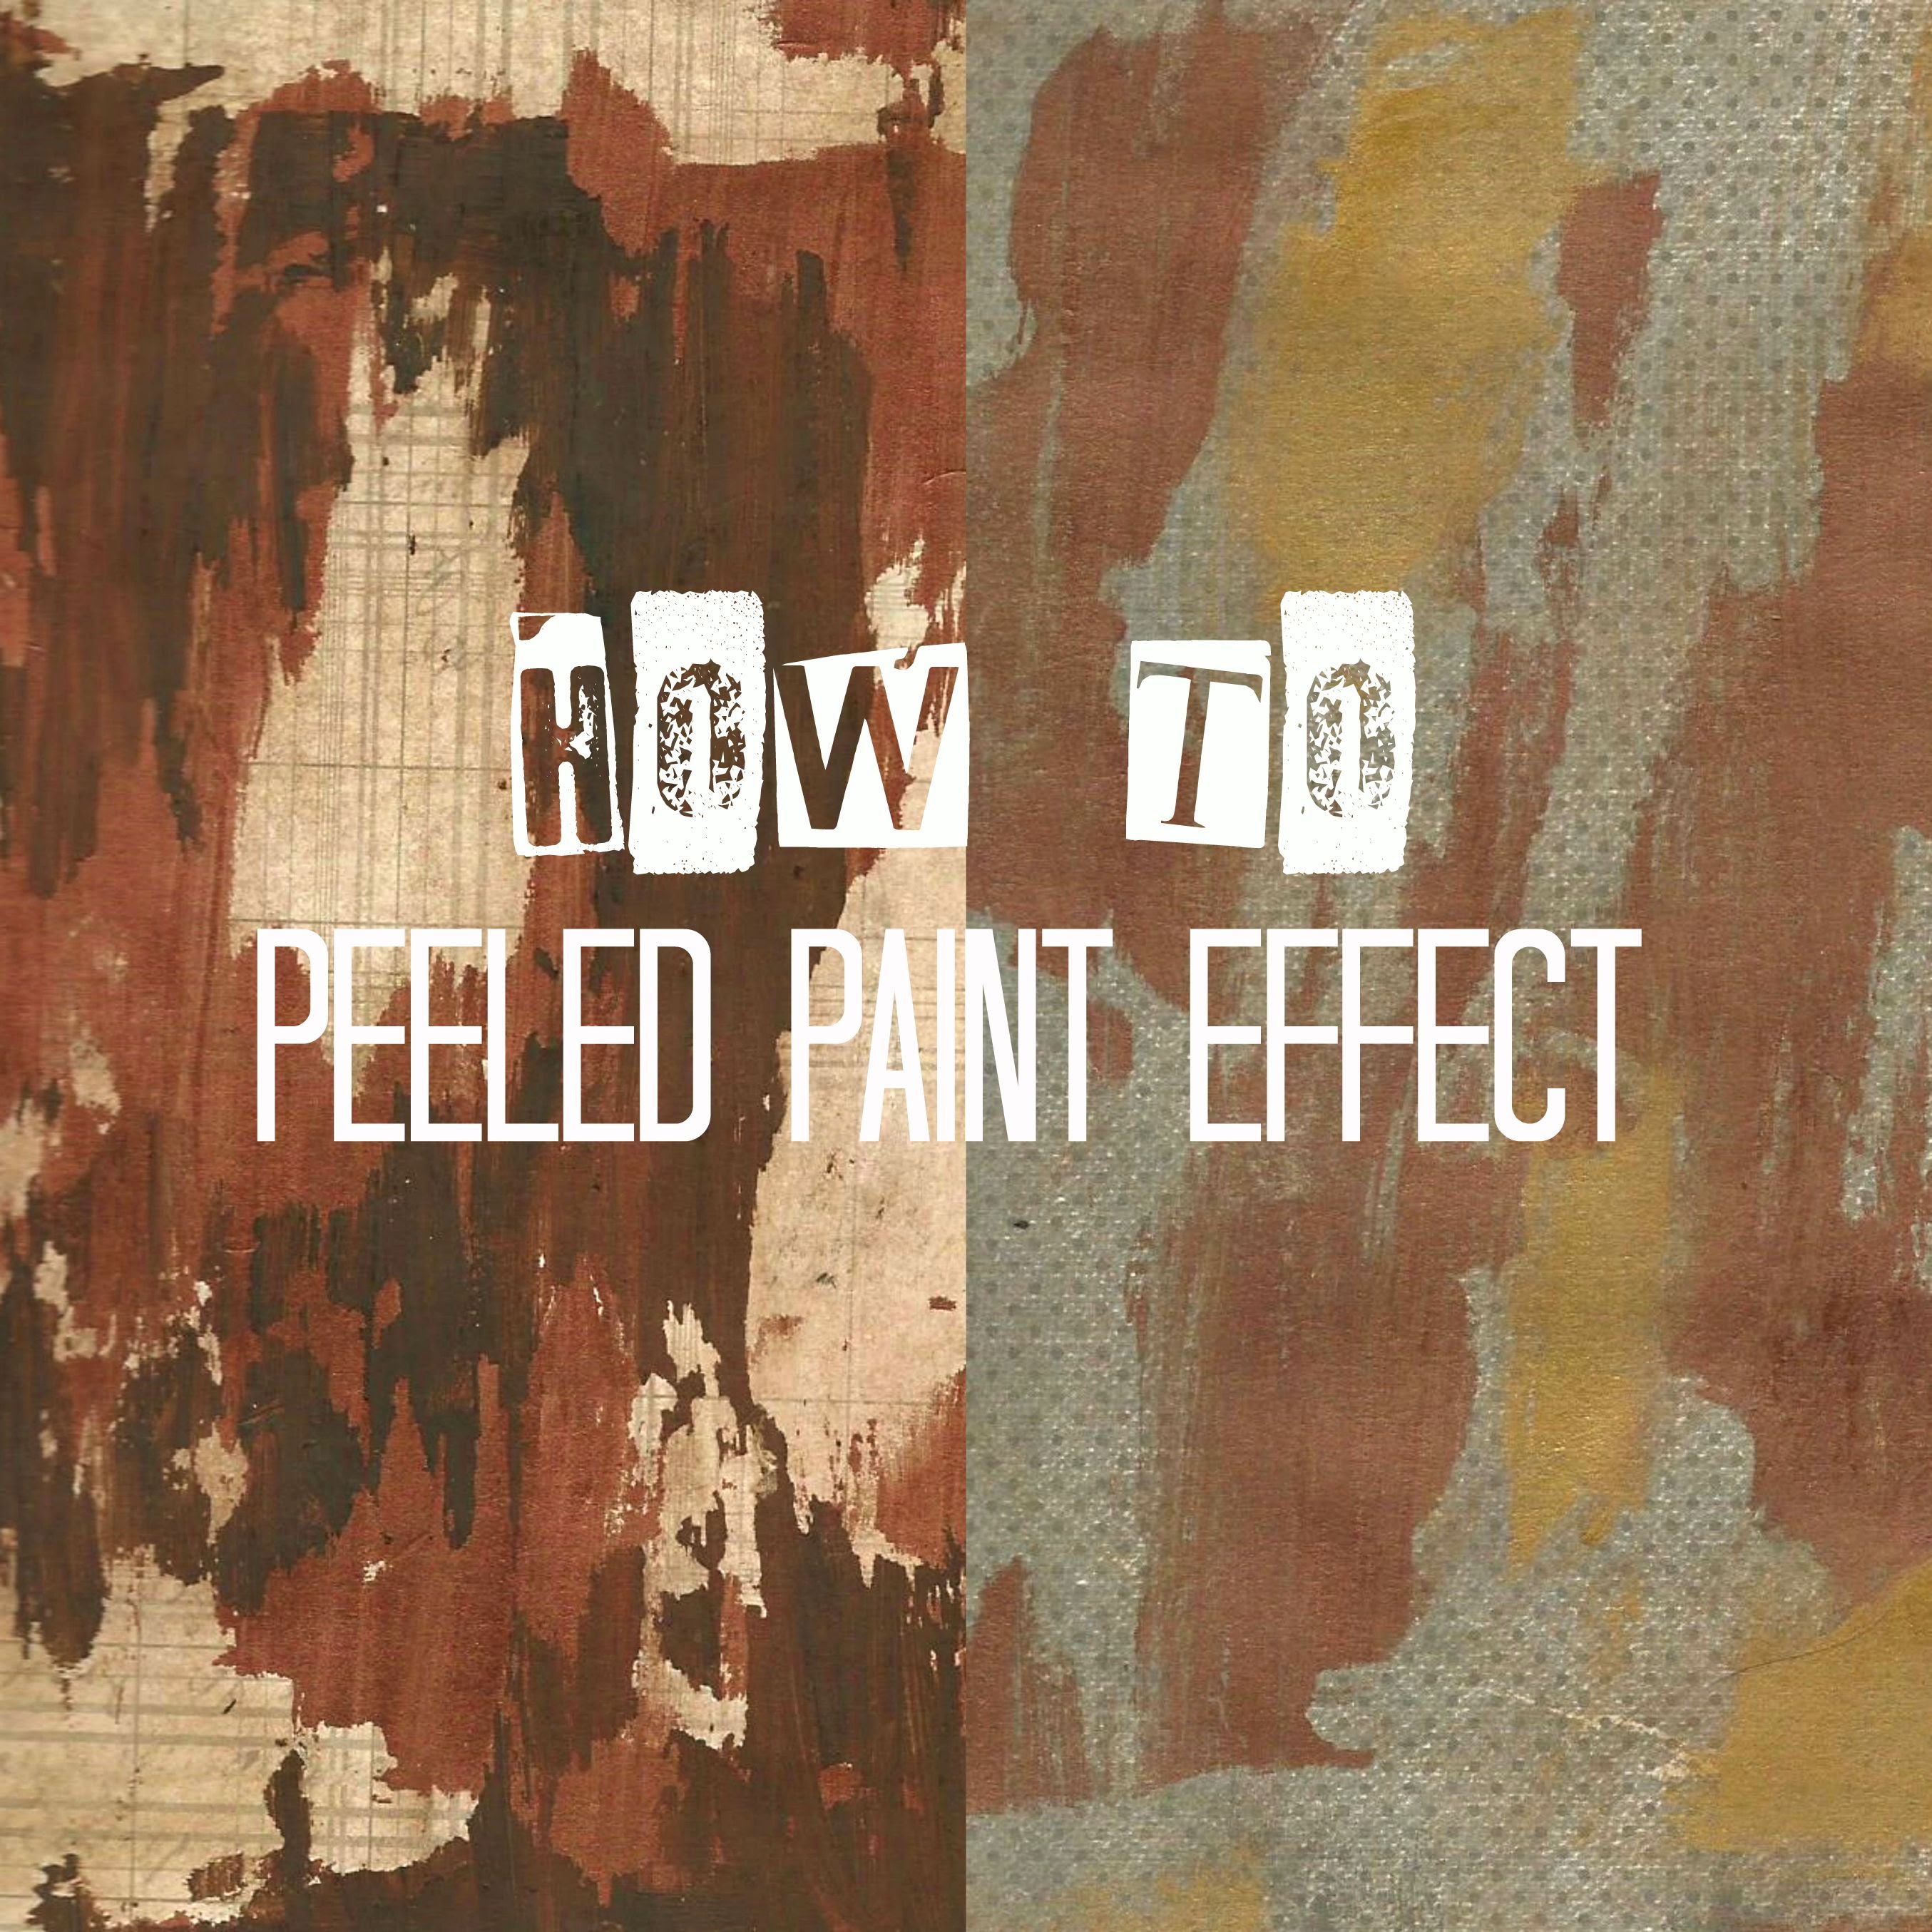 Peeled Paint Effect || How to - YouTube